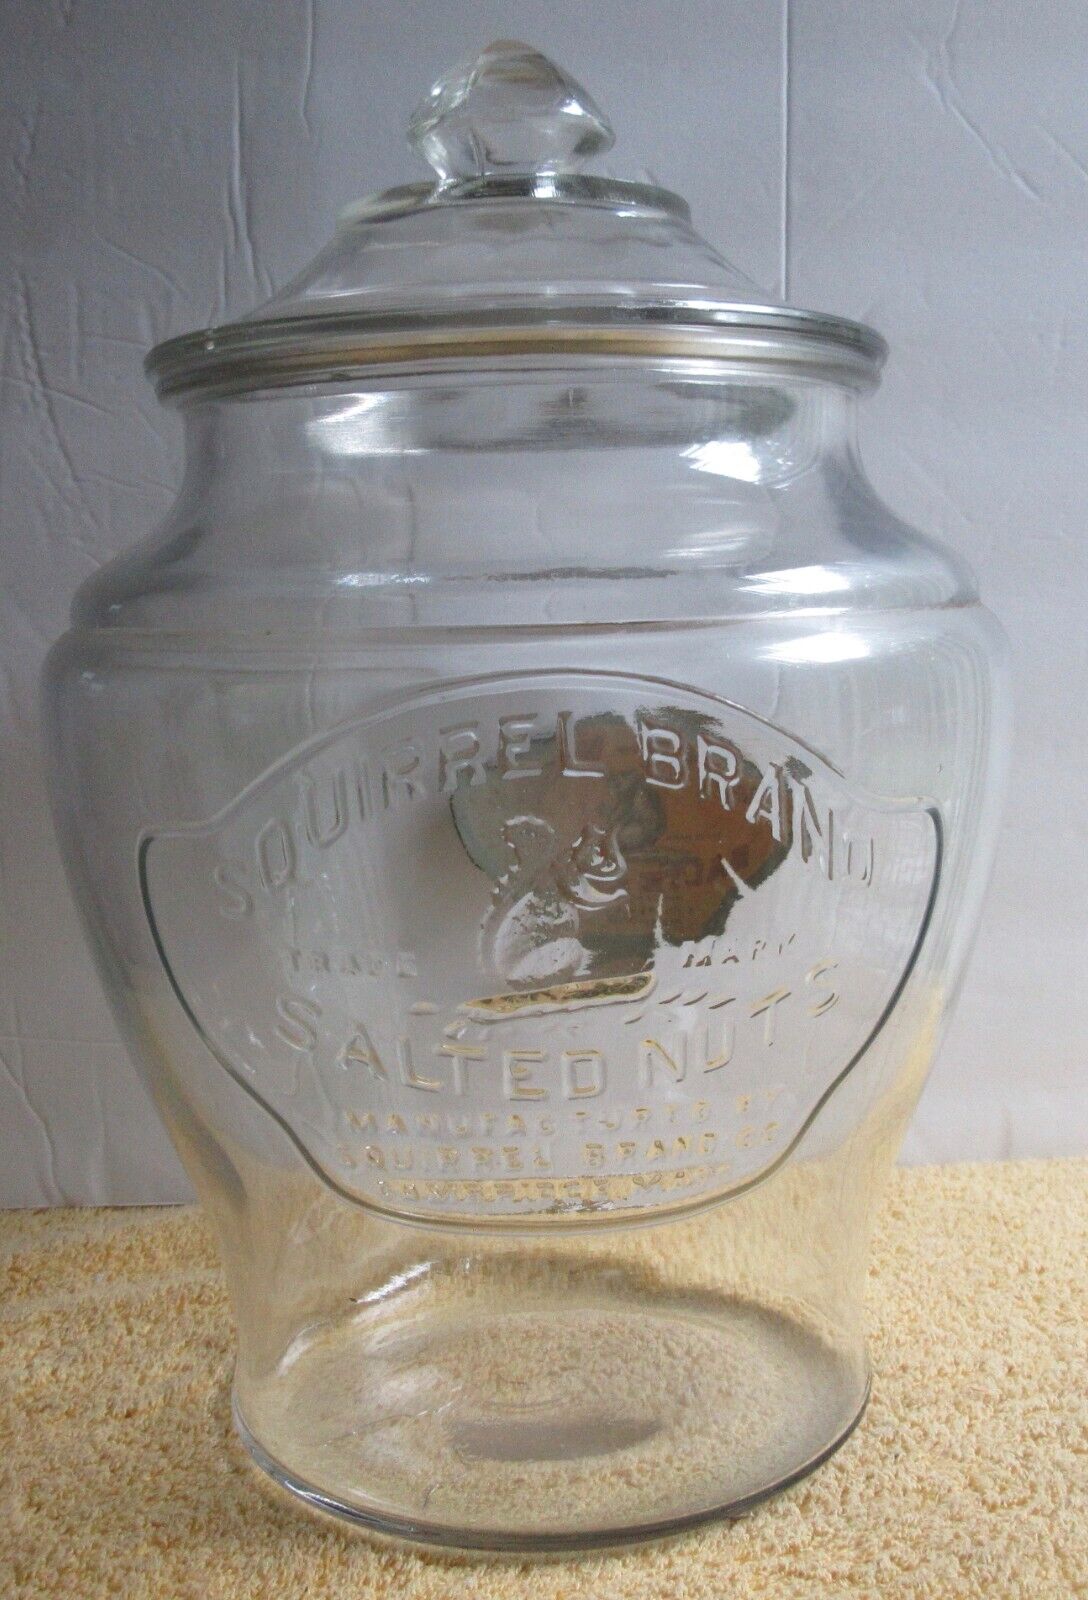 ANTQUE SQUIRREL BRAND SALTED NUTS EMBOSSED w DECAL  COUNTERTOP JAR & LID c1910